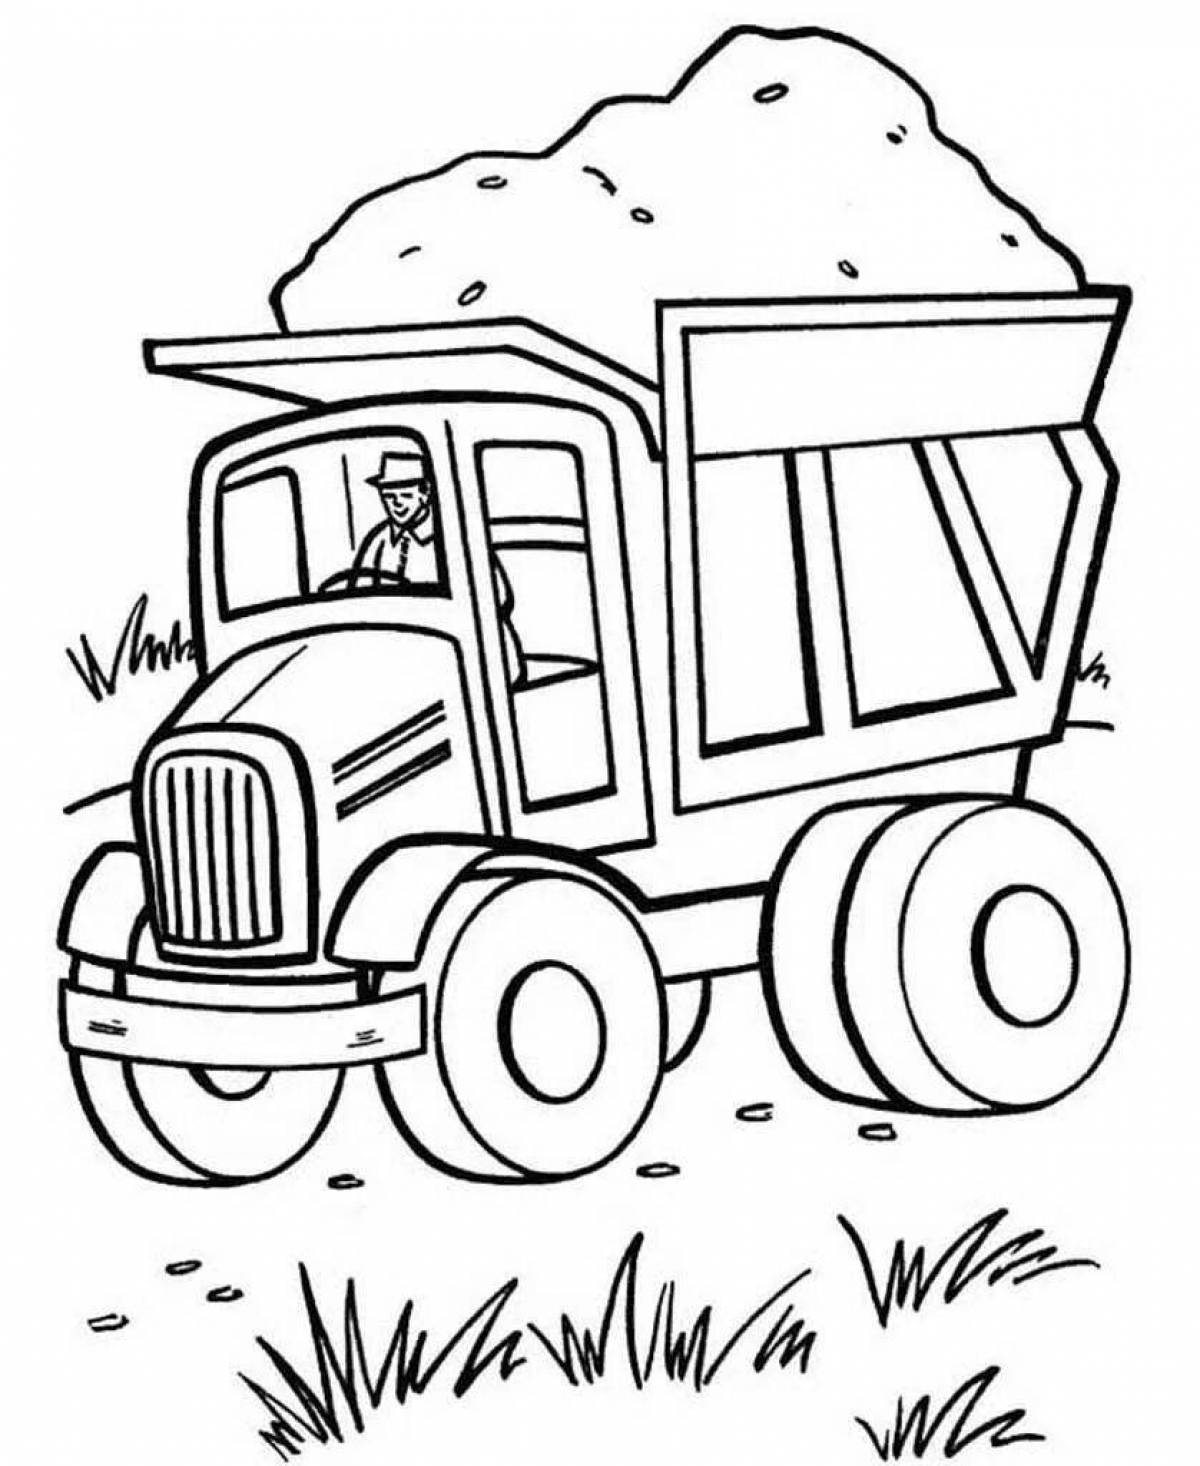 Colorful truck coloring page for 6-7 year olds